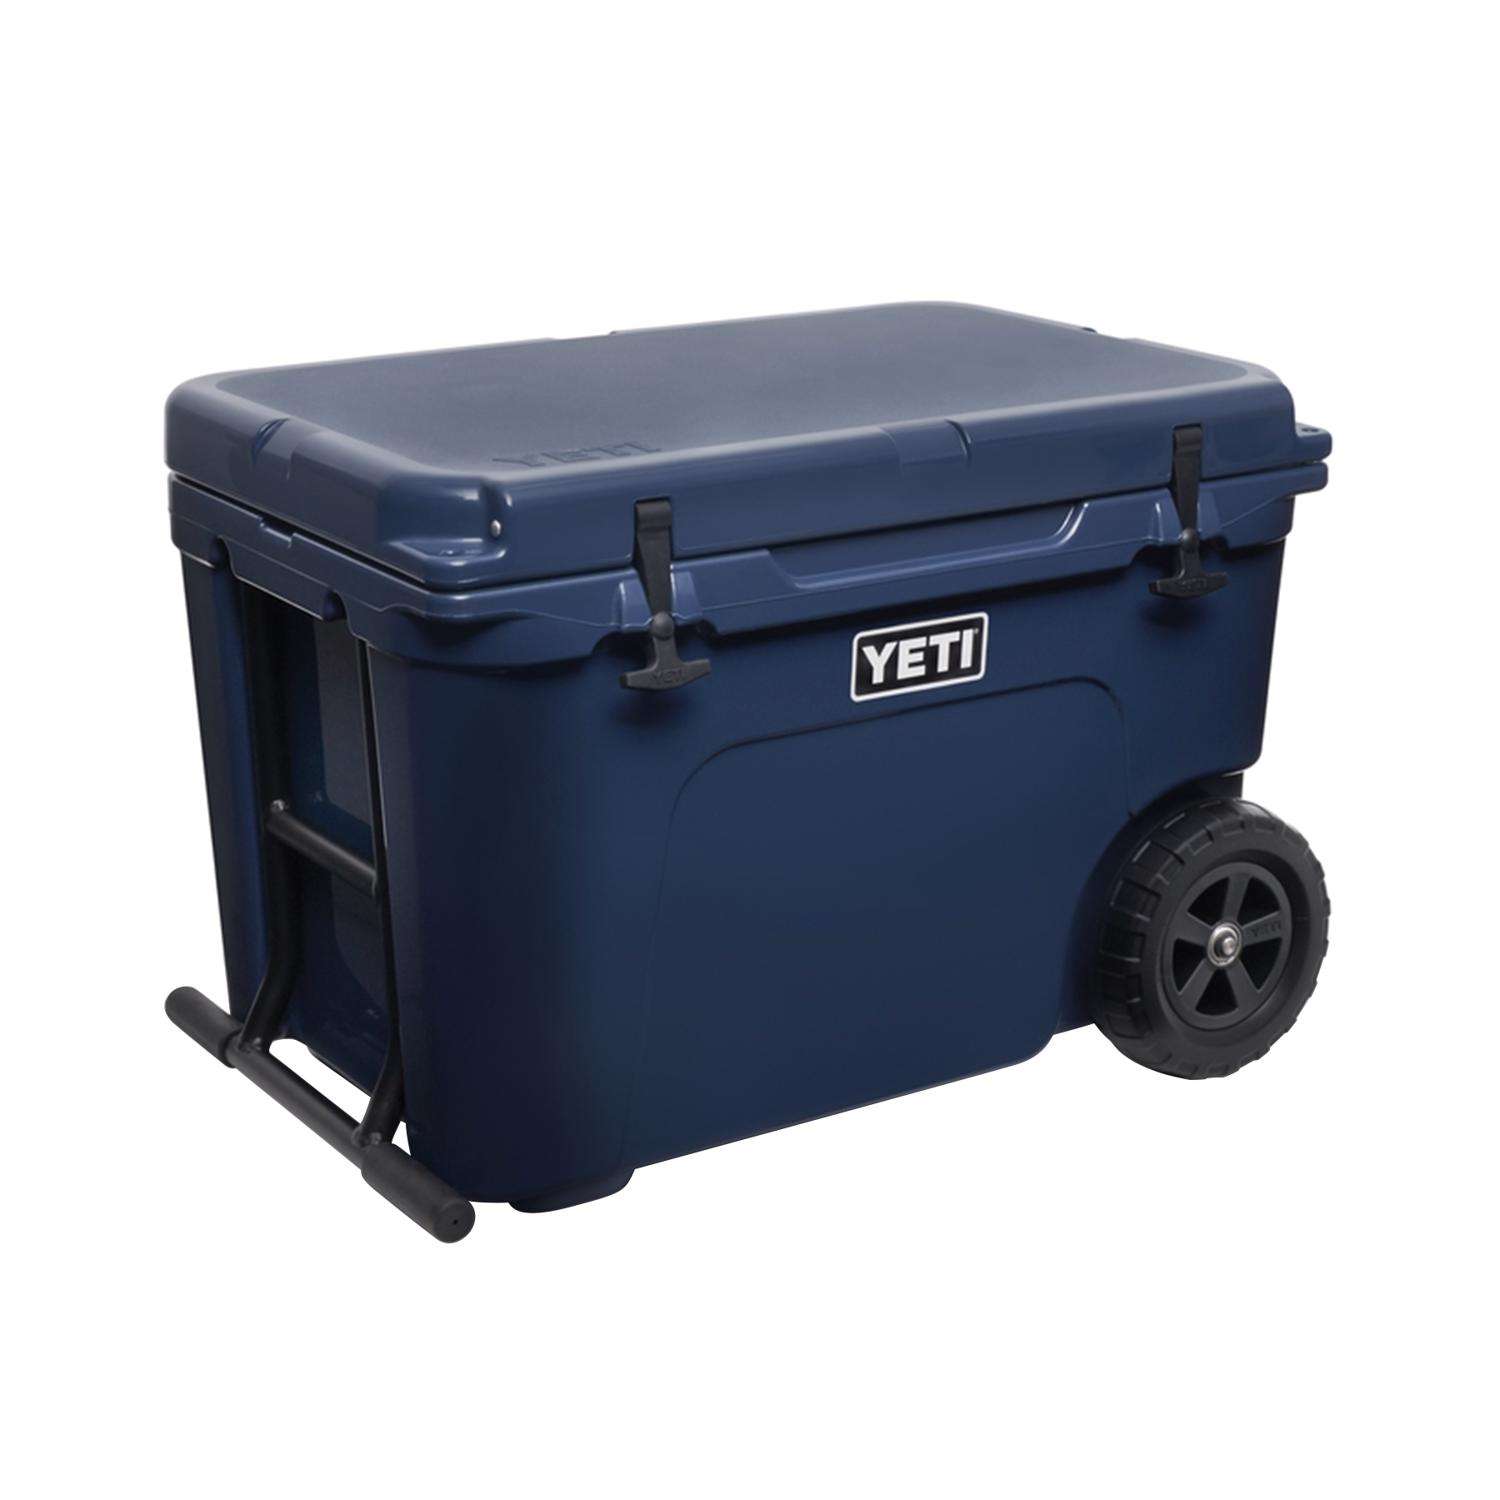 Cooler Basket for YETI Tundra Haul, YETI Roadie 48, and YETI Roadie 60 -  Wire Cooler Rack for YETI Wheeled Coolers - Compatible with YETI  Accessories, YETI Cooler Locks, YETI Ice, Cooler Dividers 1-Pack